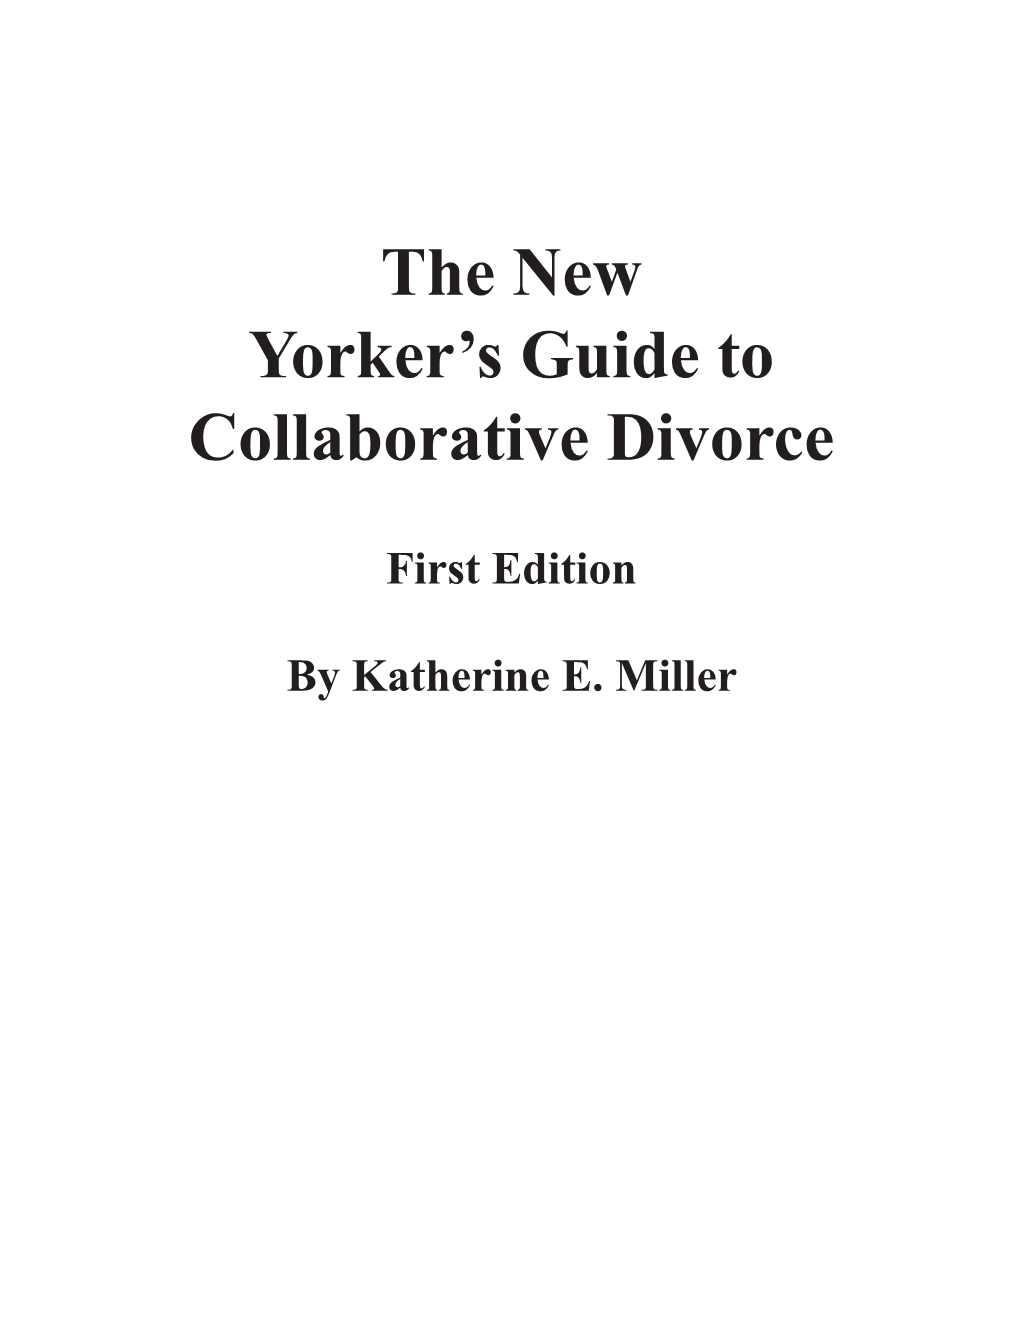 The New Yorker's Guide to Collaborative Divorce